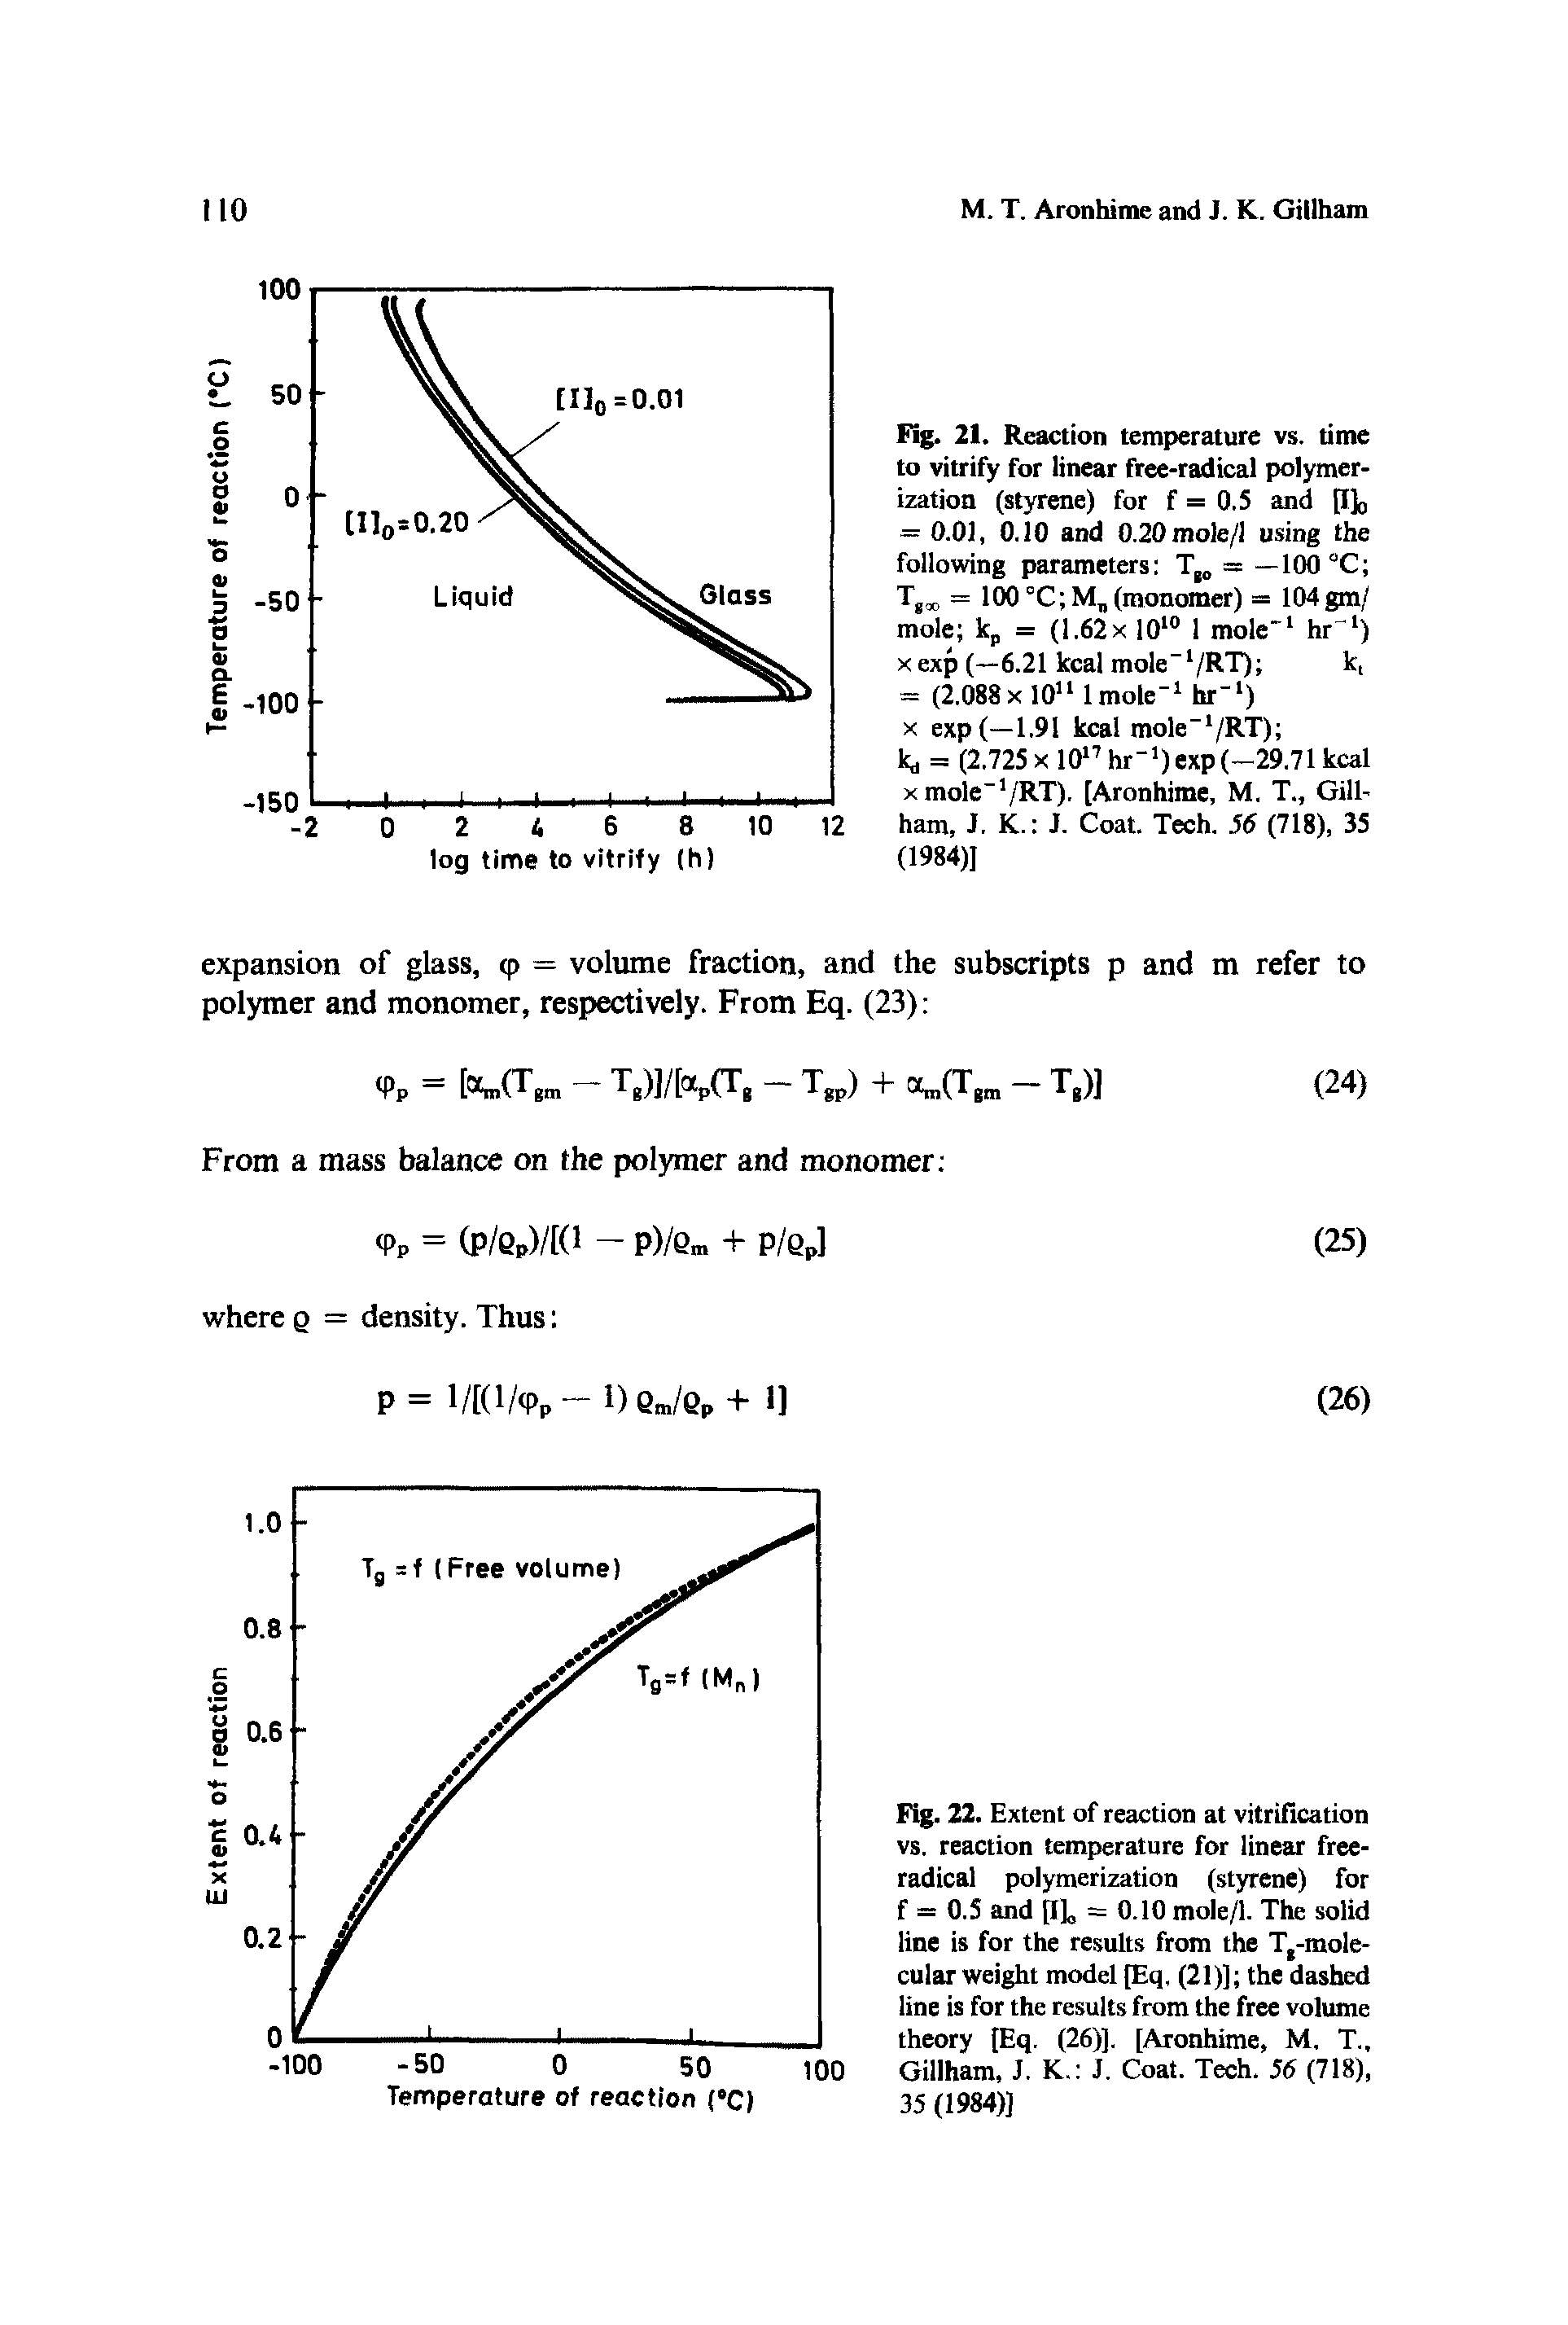 Fig. 22. Extent of reaction at vitrification vs. reaction temperature for linear free-radical polymerization (styrene) for f = 0.5 and [II, = 0.10 mole/1. The solid line is for the results from the T,-mole-cular weight model [Eq. (21)] the dashed line is for the results from the free volume theory [Eq. (26)]. [Aronhime, M, T., Gillham, J. K. J. Coat. Tech. 56 (718), 35 (1984)]...